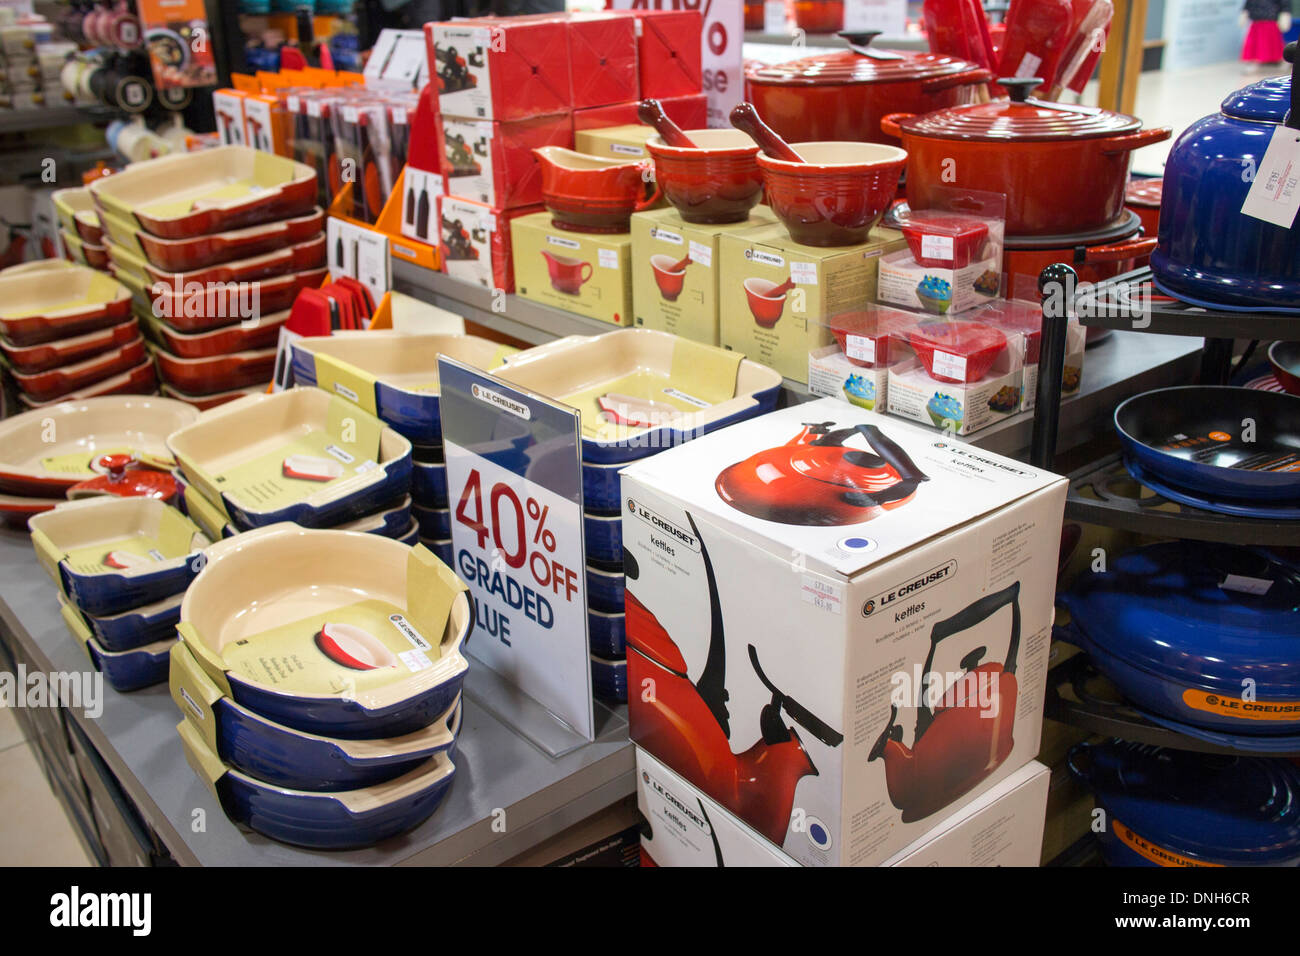 Le Creuset the french cookware manufacturer enameled cast-iron cookware sauce pans and tagines Stock Photo